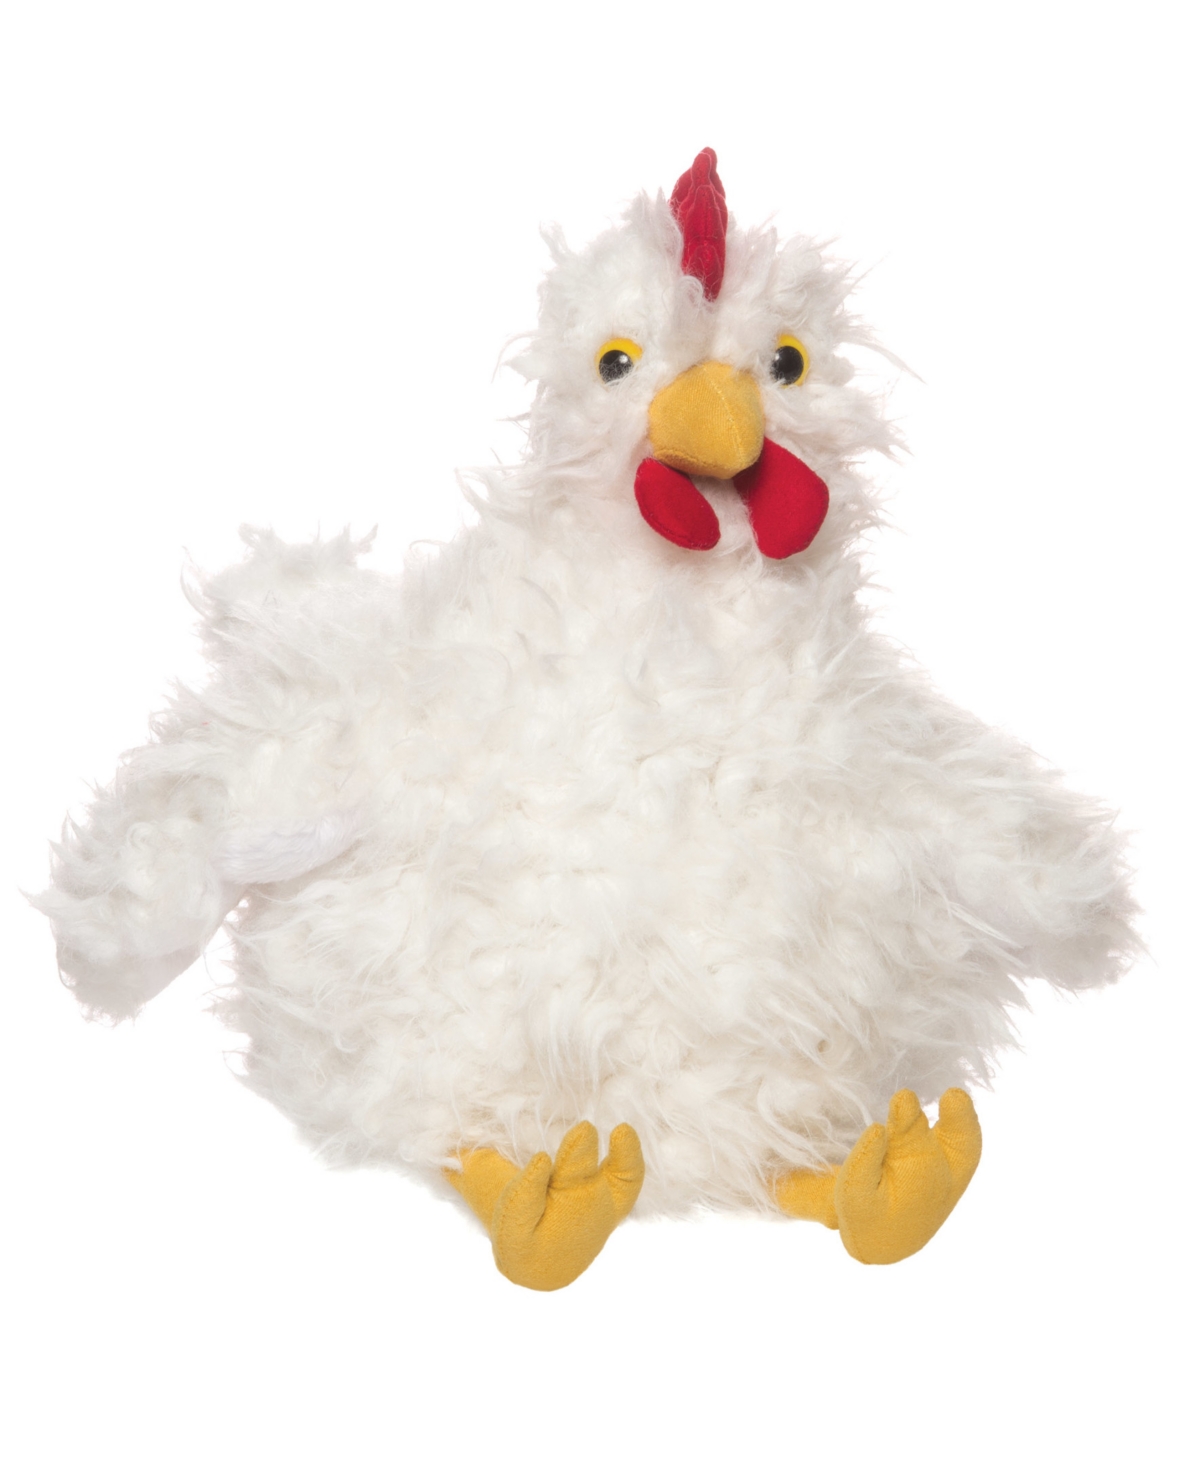 Manhattan Toy Company Kids' Stuffed Animal Chicken Plush Toy, Cooper In Multicolor